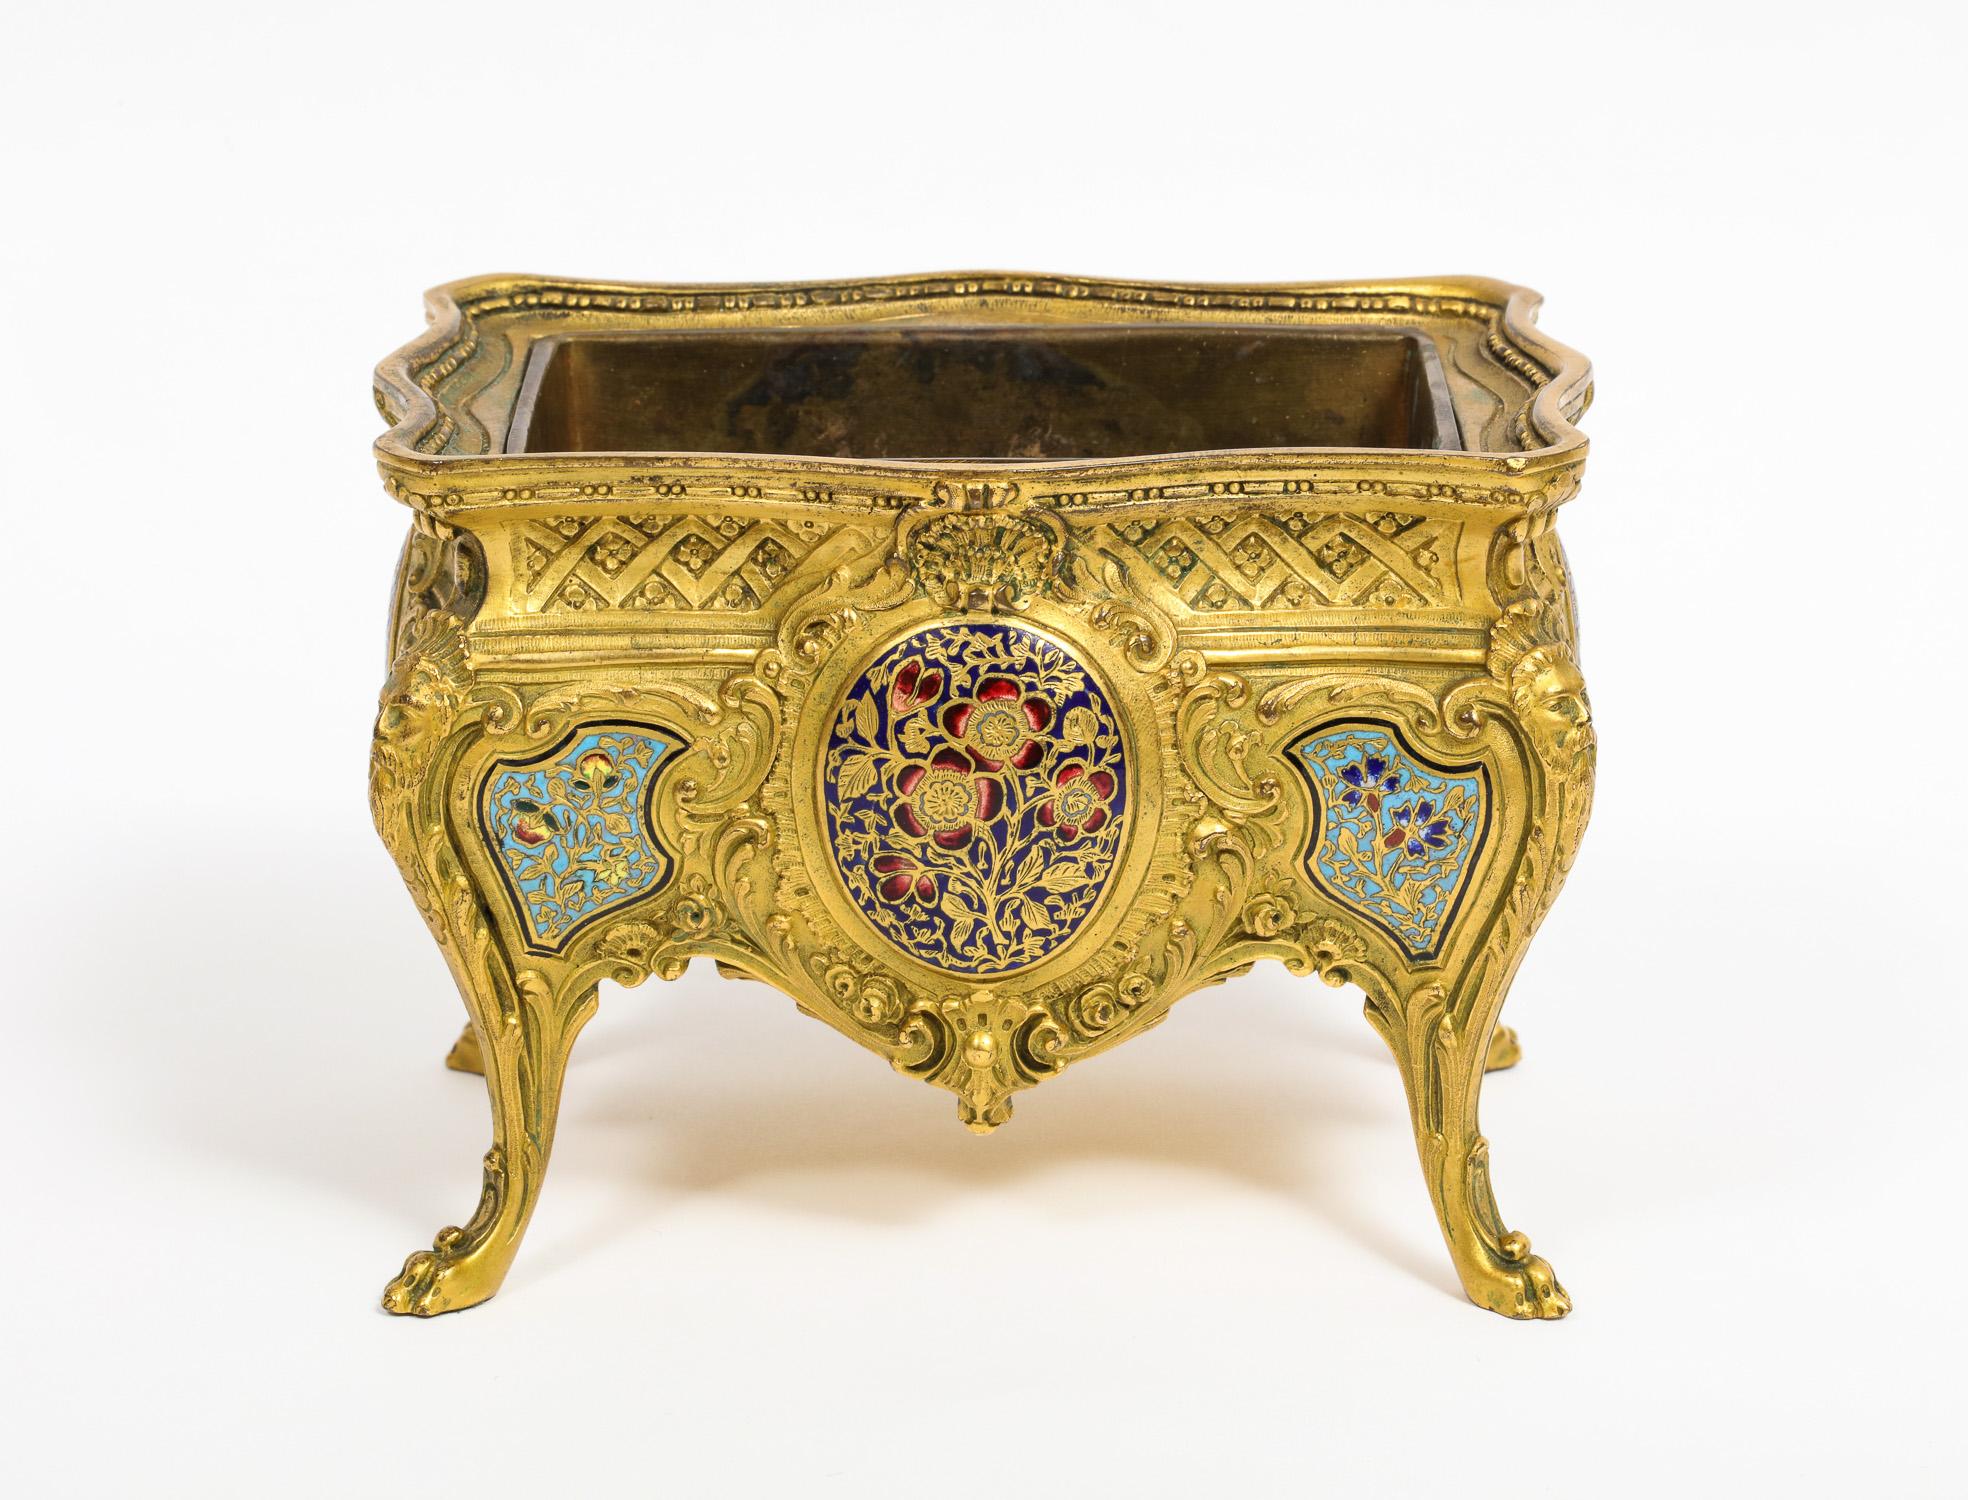 A French ormolu, bronze and Champlevé cloisonné enamel jardiniere centerpiece, in the form of a commode, circa 1880.

Beautiful quality ormolu and enamel, with original liner.

Can be used as a planter, cachepot, centerpiece, or